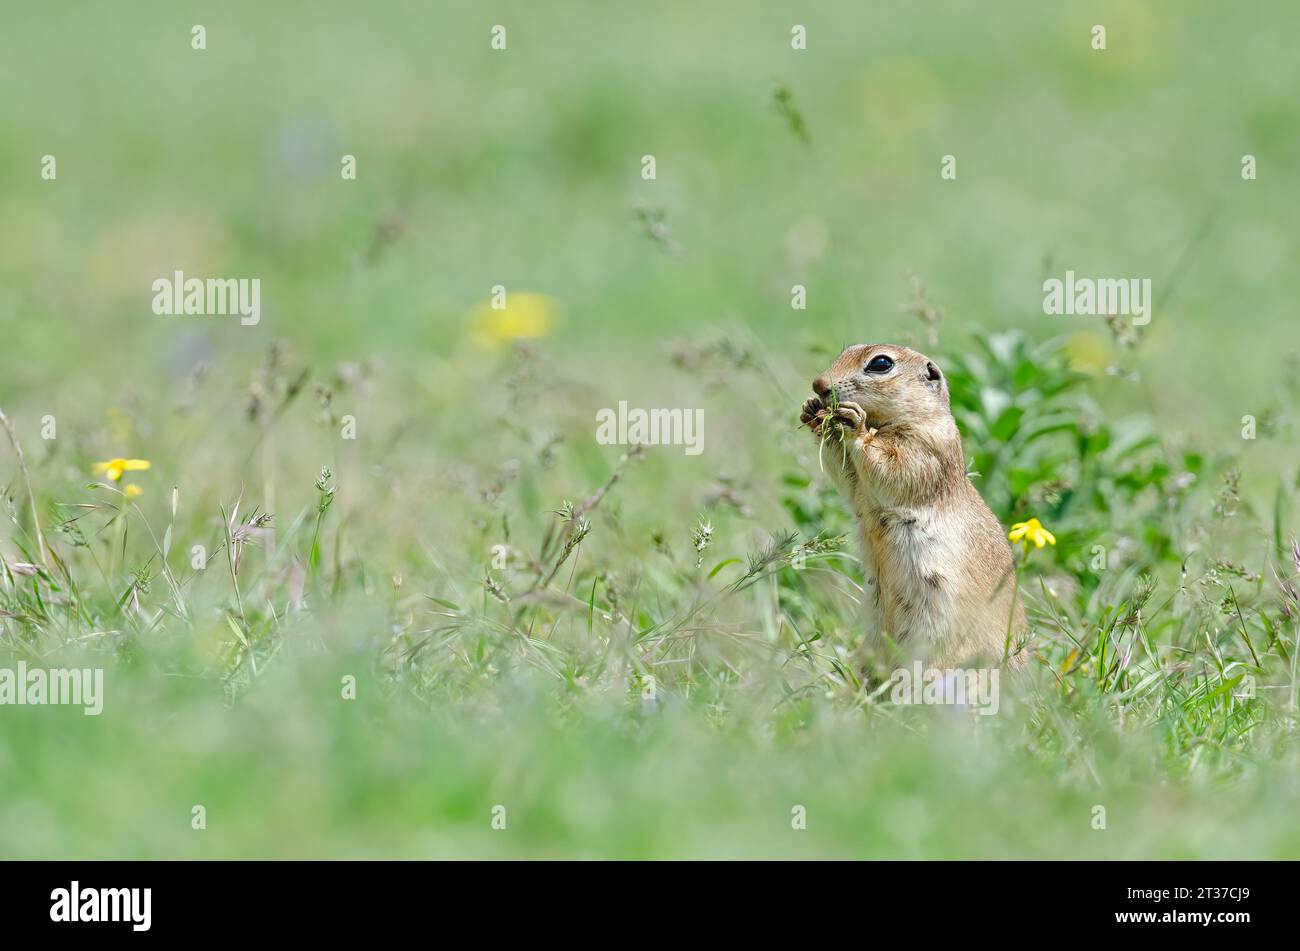 Ground squirrel feeding. Cute funny animal ground squirrel. Green nature background. Stock Photo